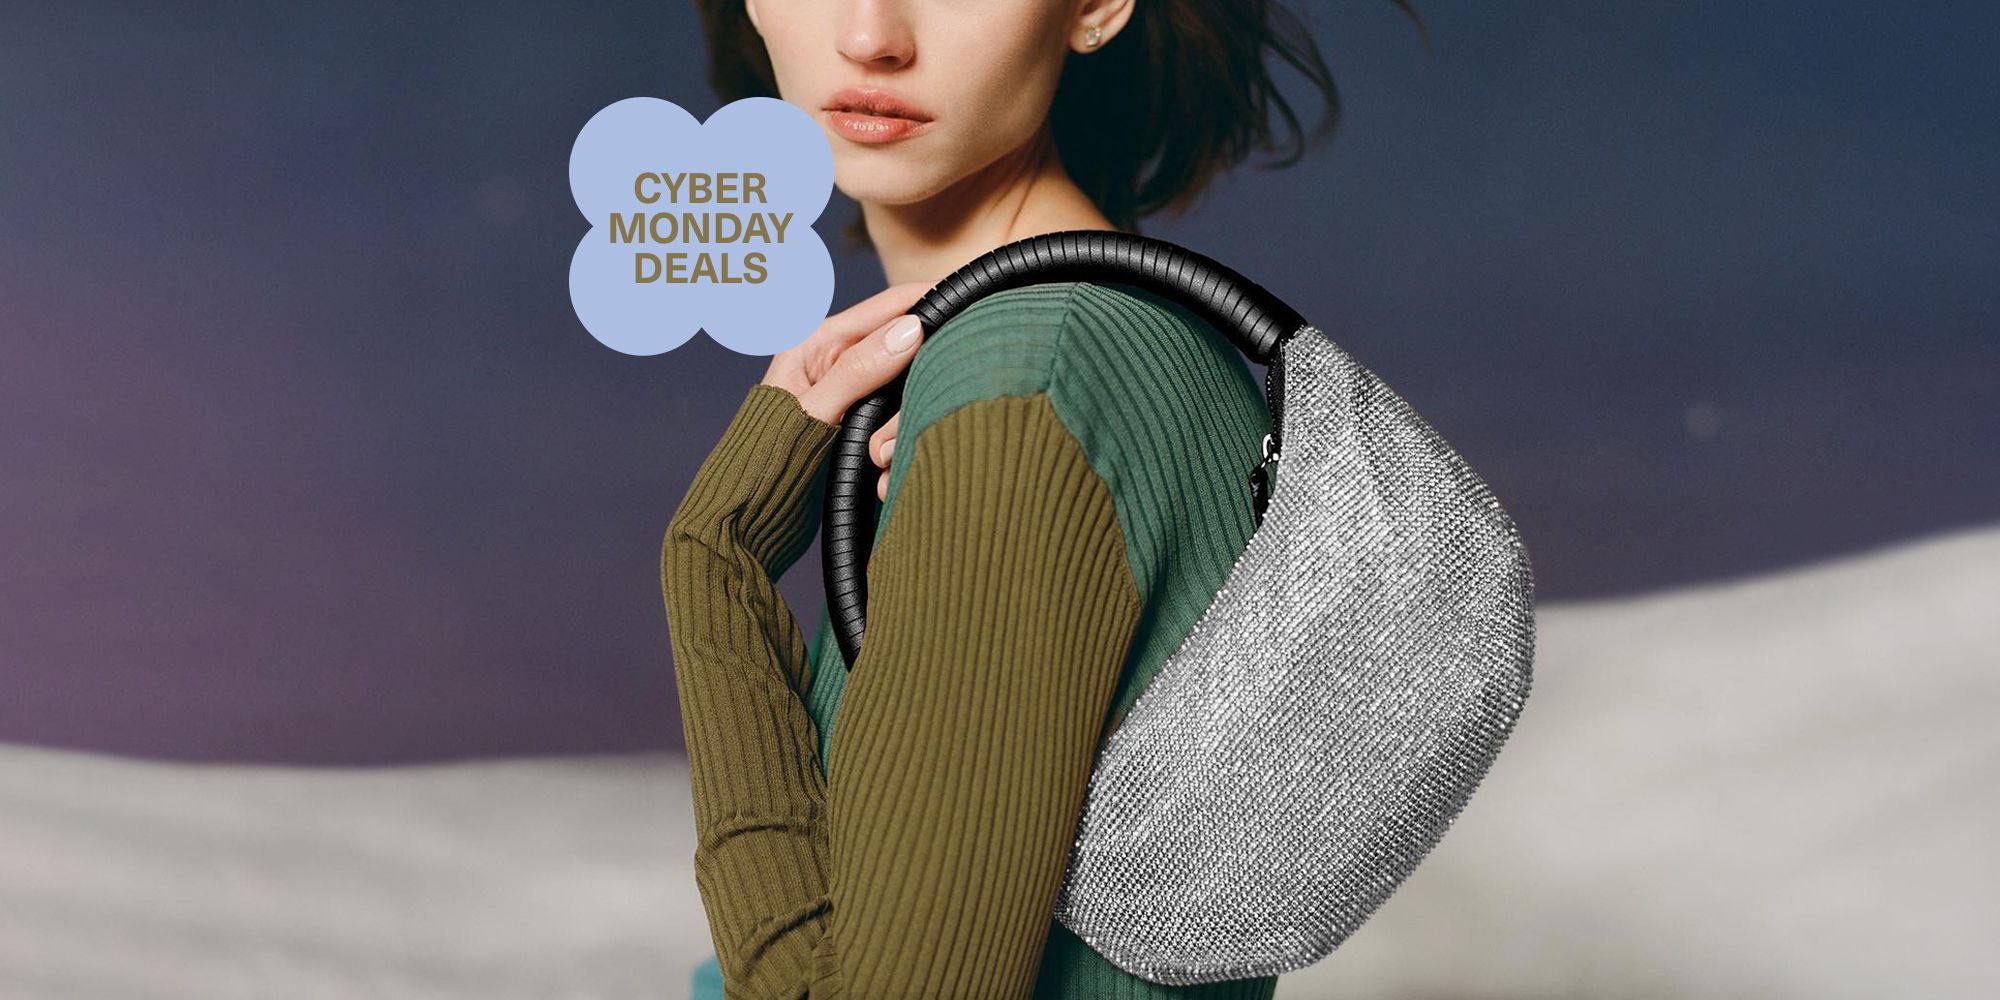 Premium Photo | A laptop and shopping bags on Cyber Monday